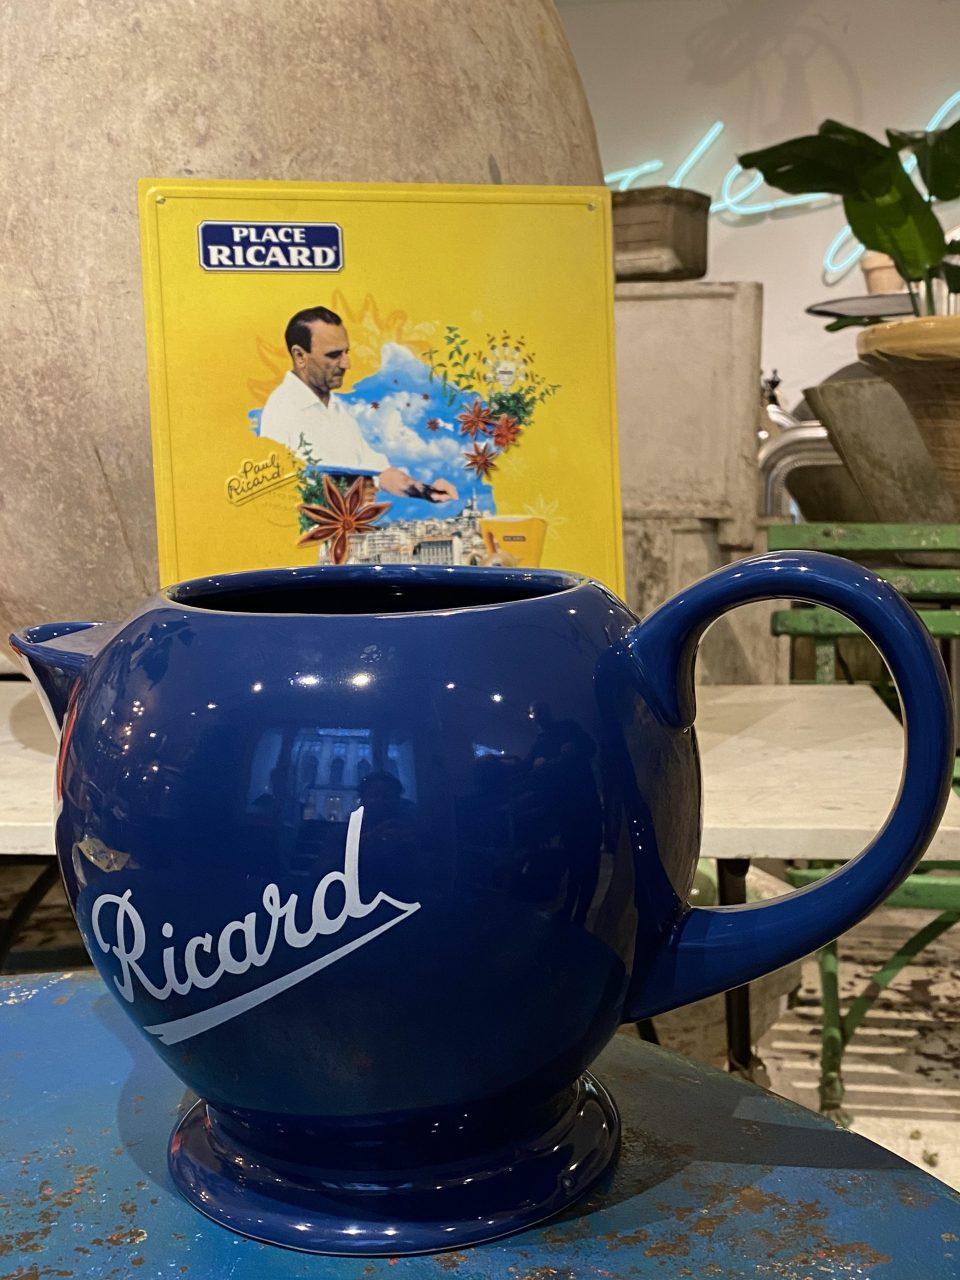 Nostalgic French Ricard pitcher. Great shape, and would look super placed in a retro setting, summer cottage, bar, even as a vase etc.

This super vintage blue ceramic jug with white writing dates back to circa 1950s and would have stood in French